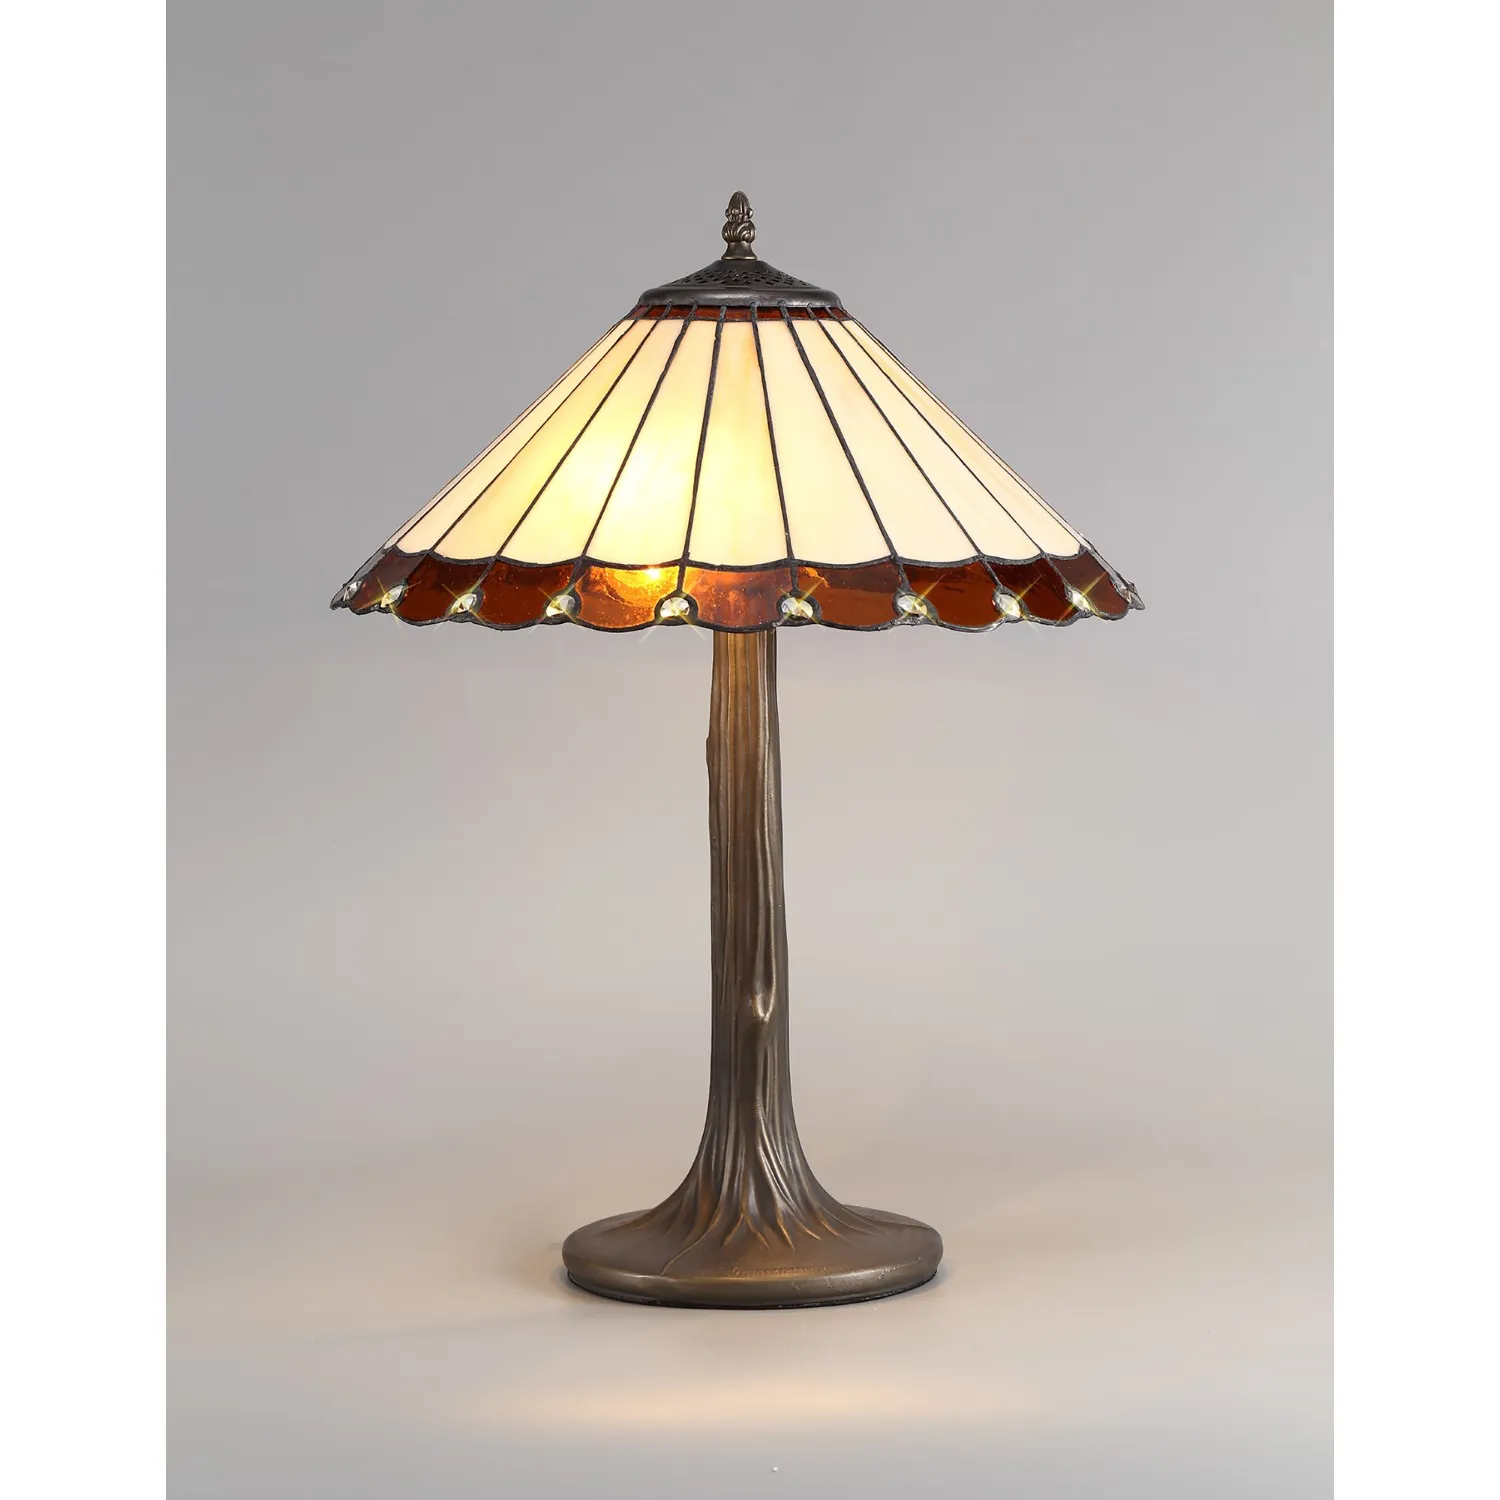 Ware 2 Light Tree Like Table Lamp E27 With 40cm Tiffany Shade, Amber Cream Crystal Aged Antique Brass